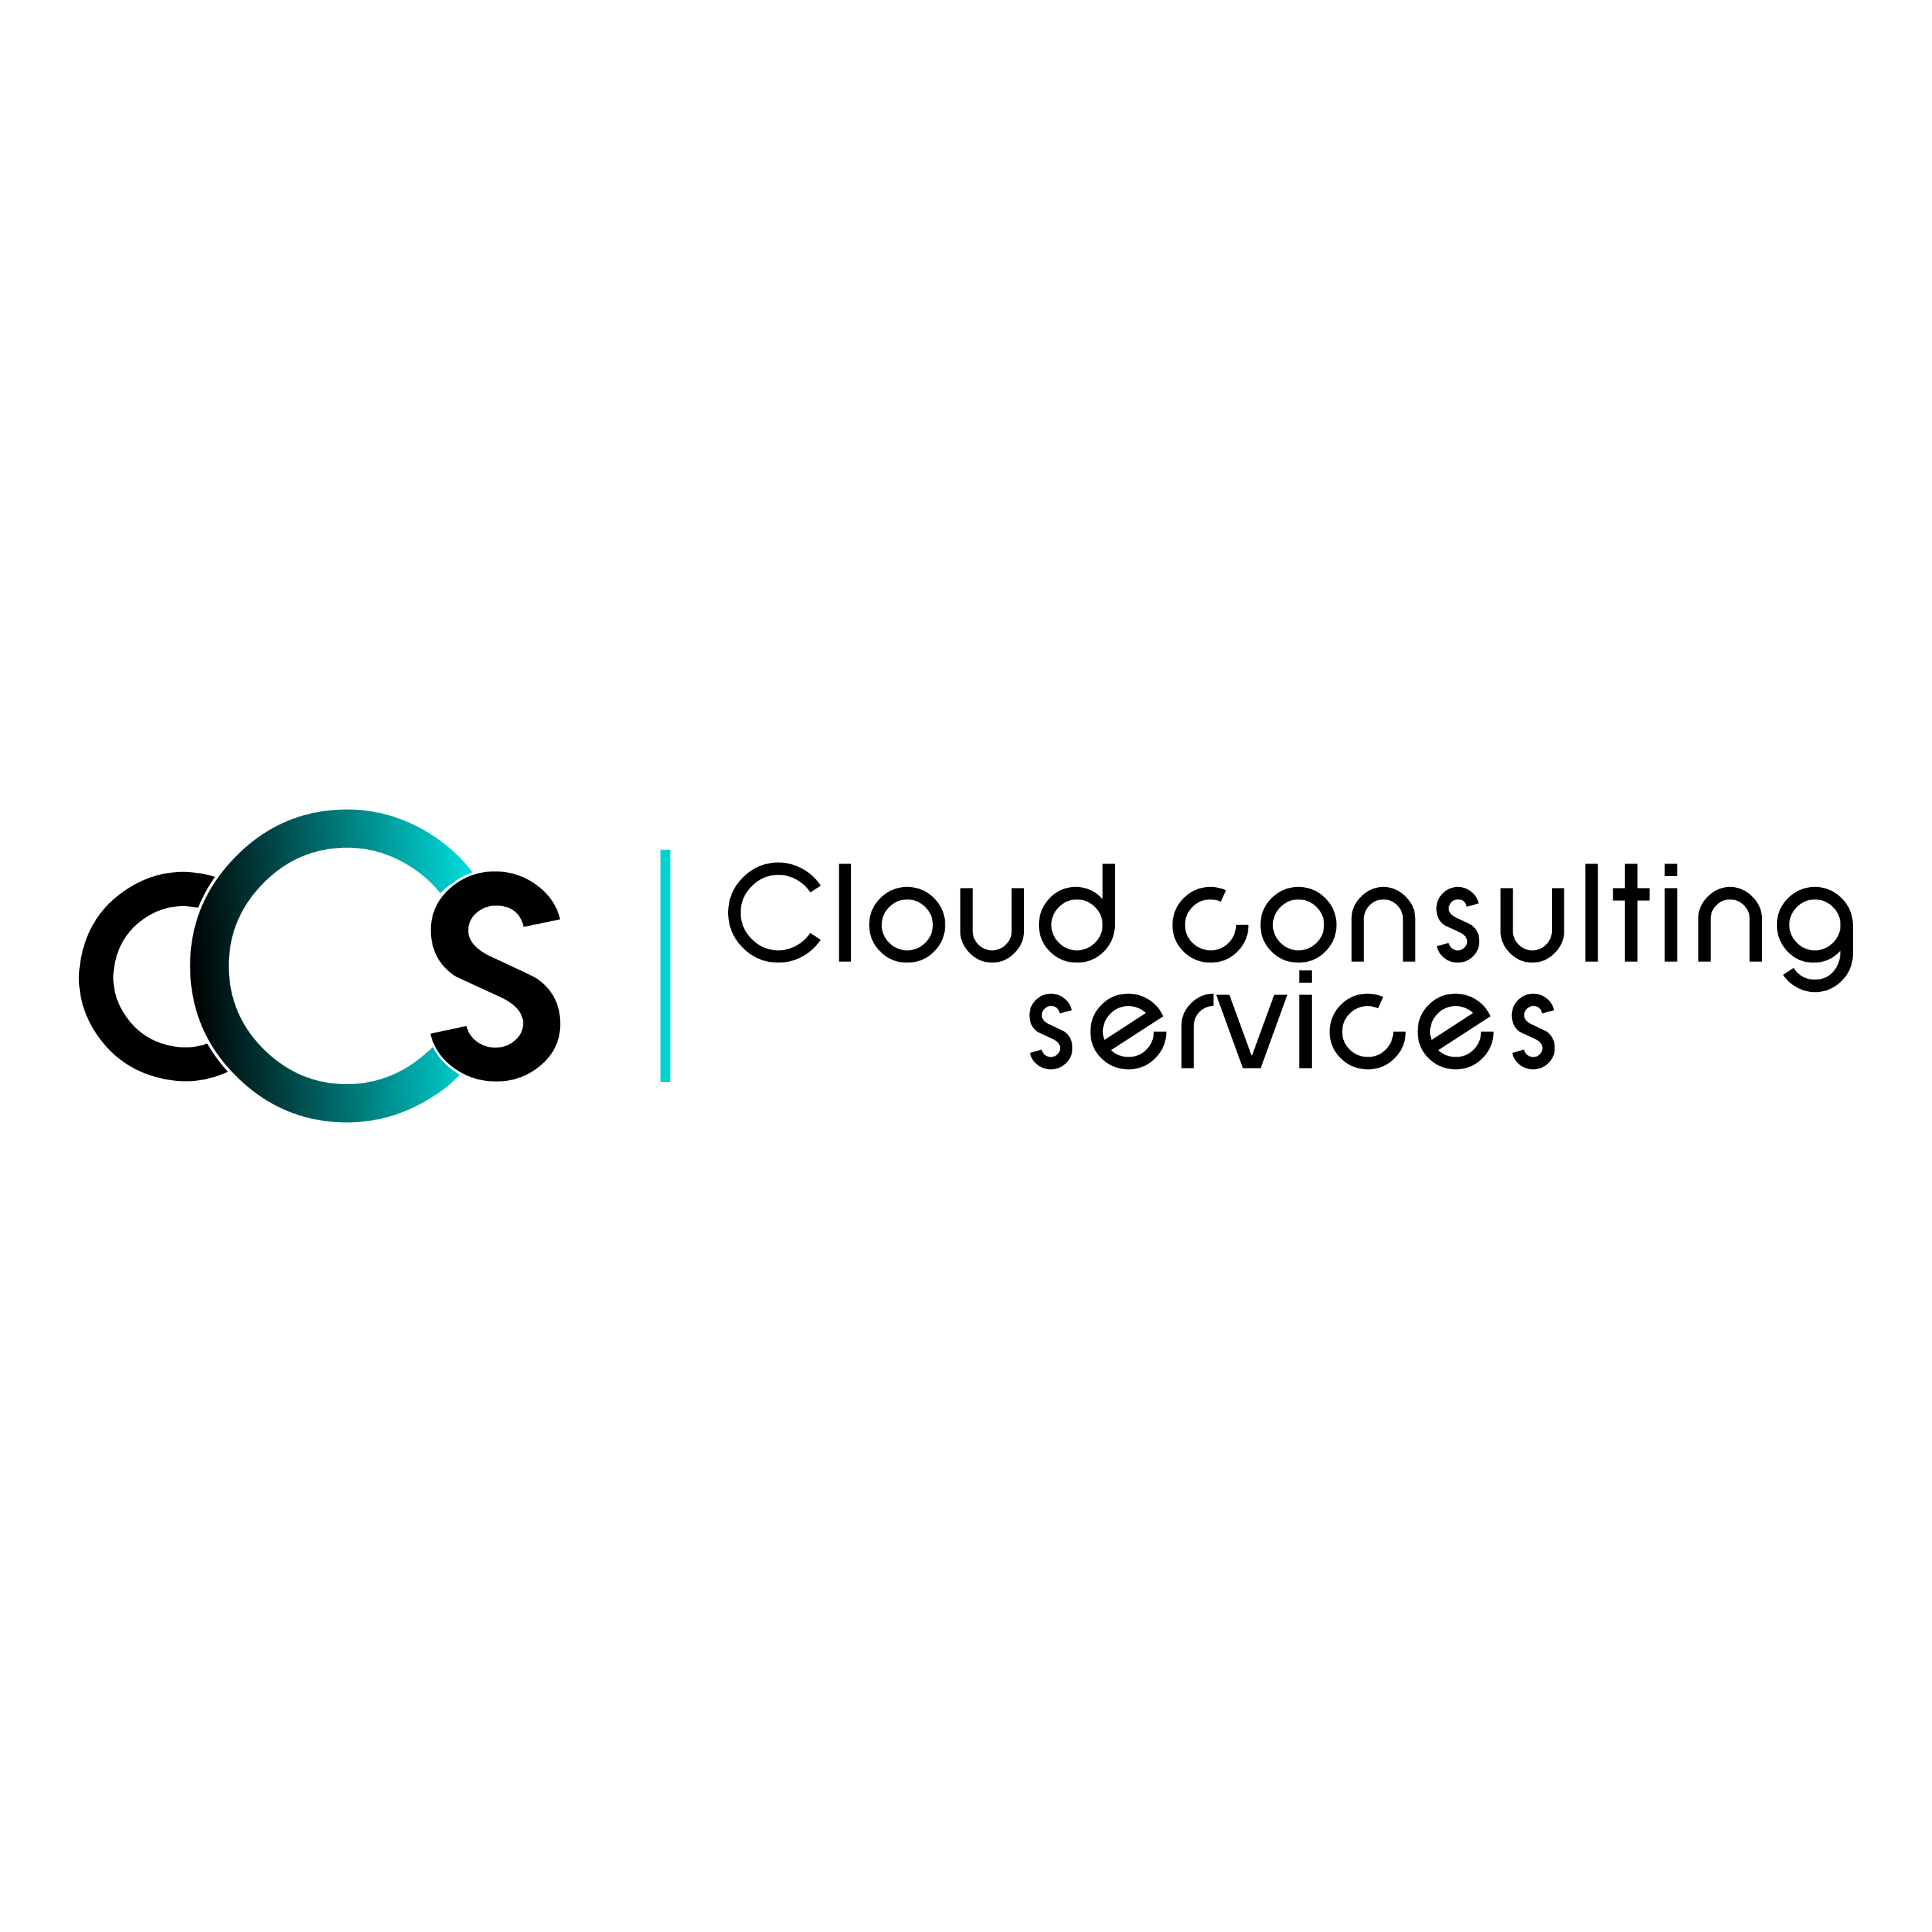 Ccs Proposal for the creation of Logo-03